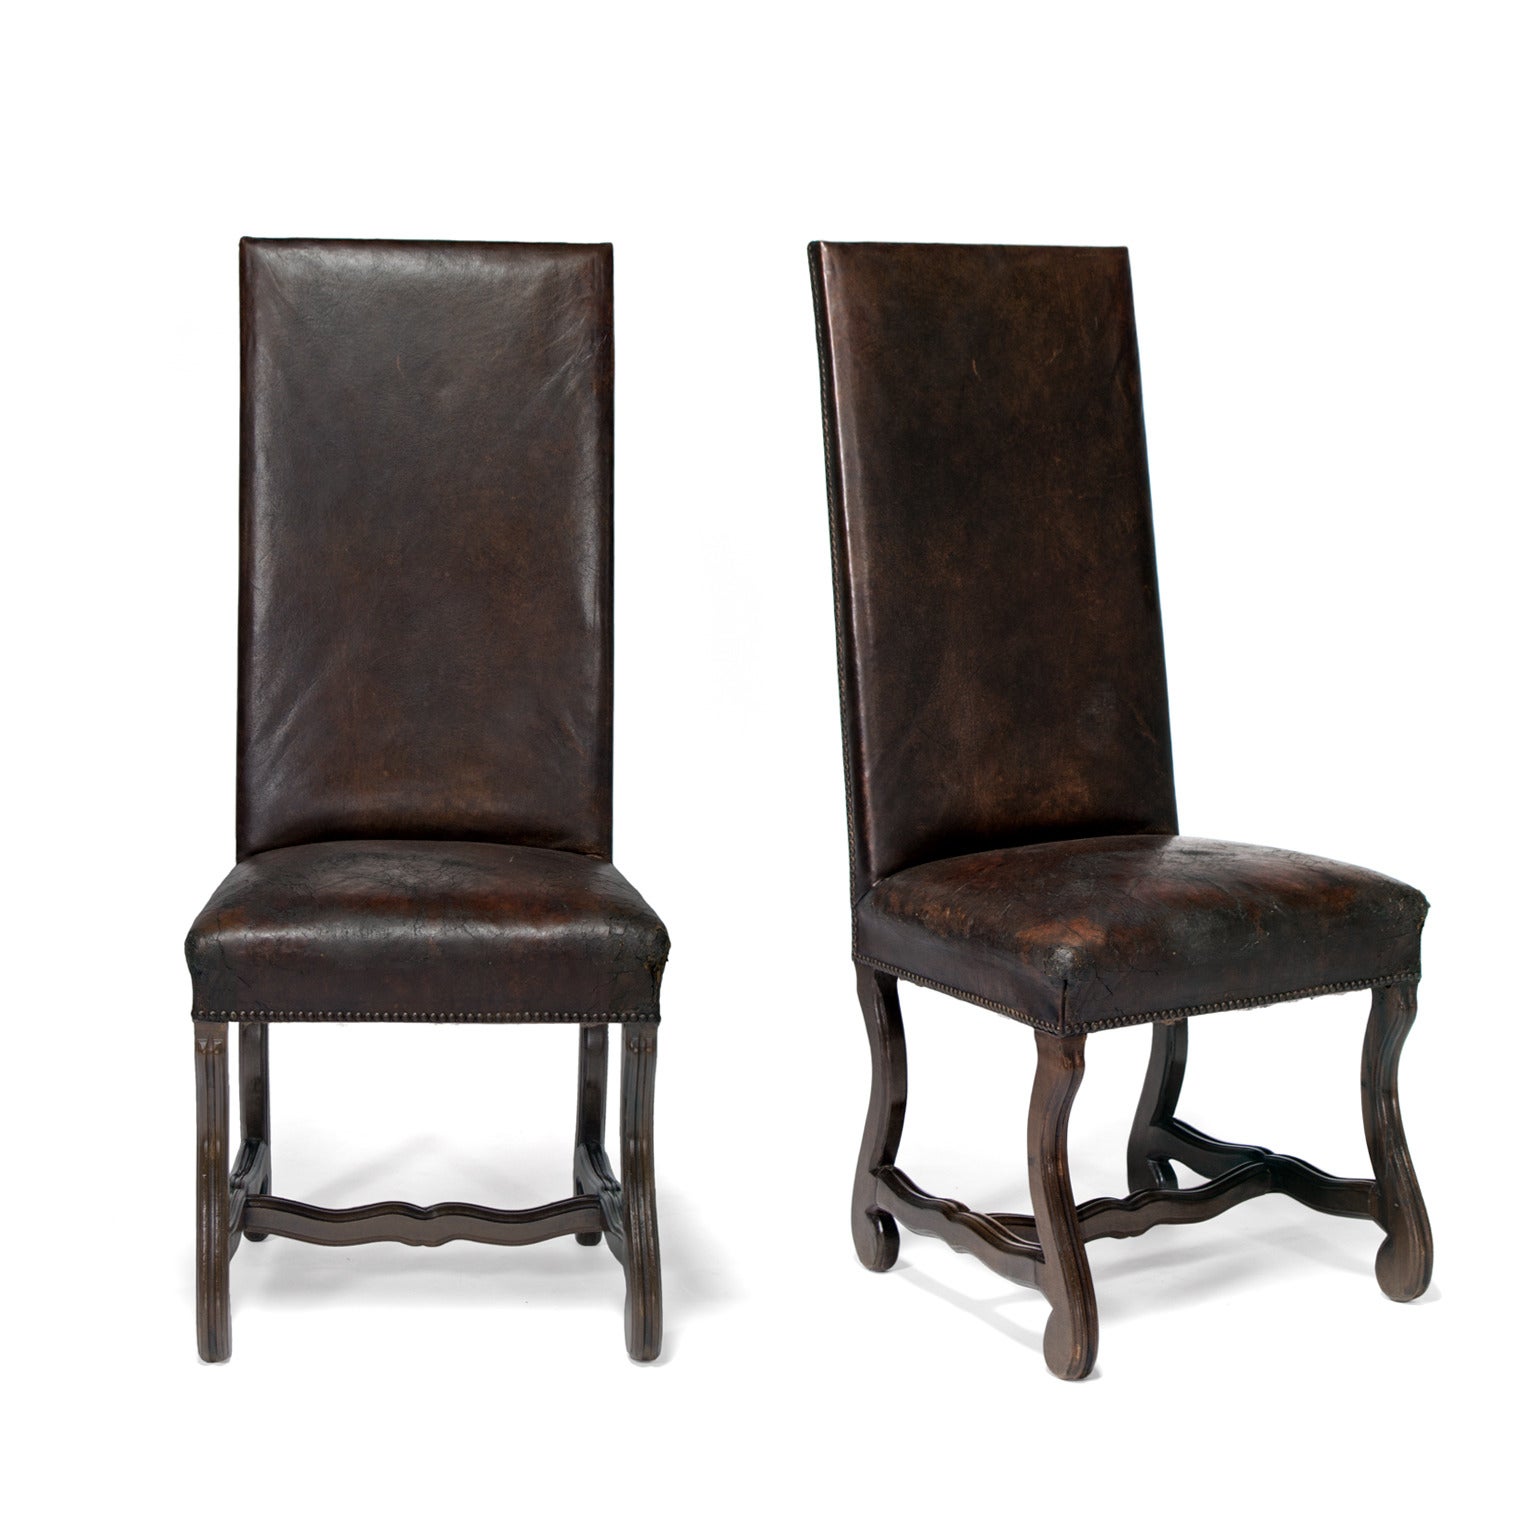 Pair of Leather Andalusian Chairs